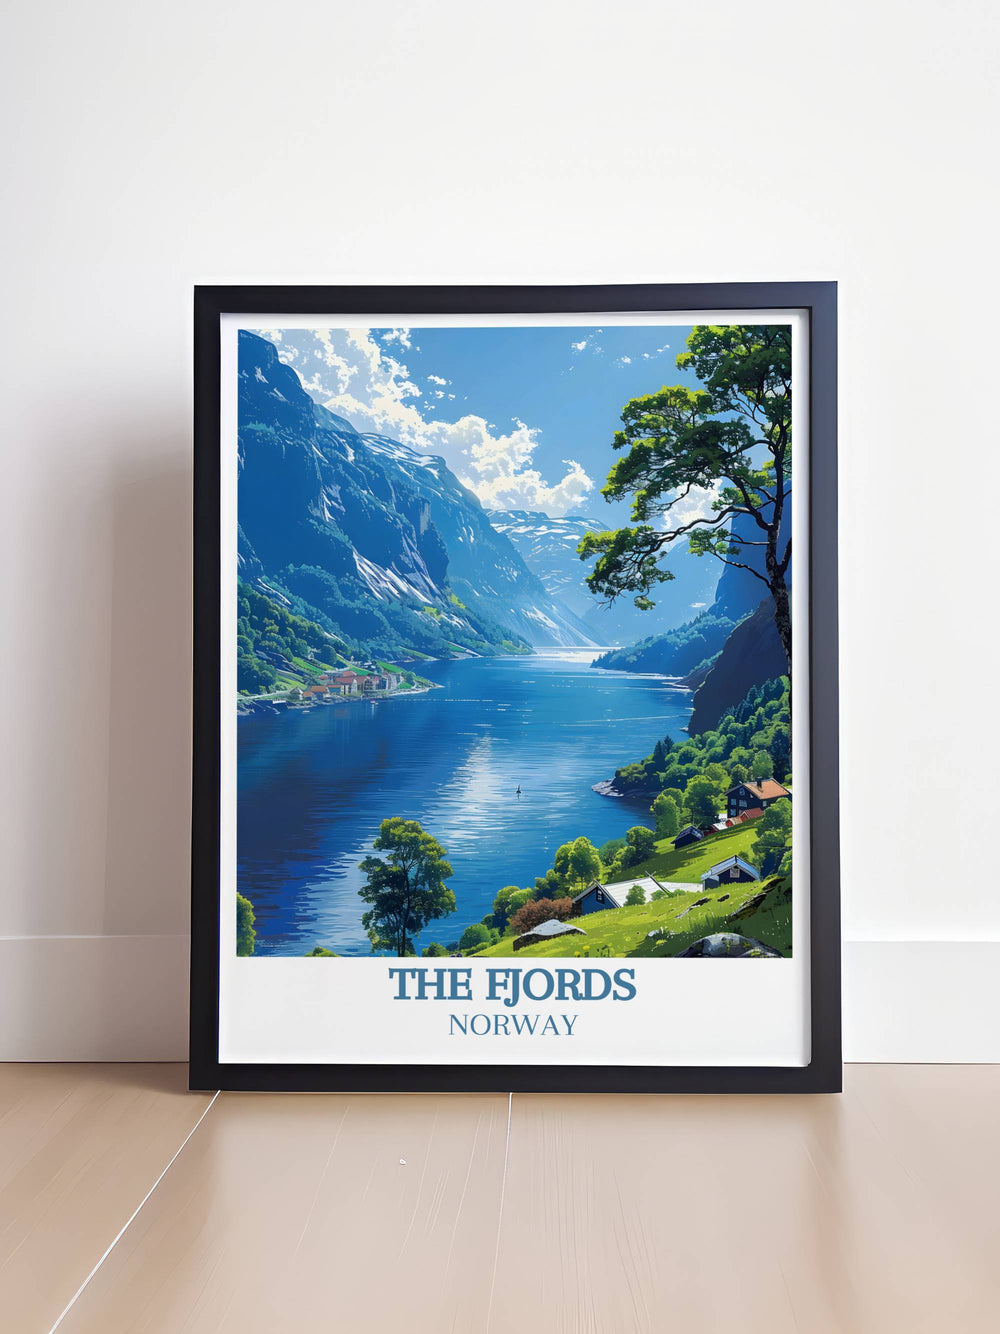 The Fjords gallery wall art showcasing the dramatic interplay of light and shadow on Norways fjords, highlighting the deep blue waters and lush greenery, ideal for enhancing your home decor.